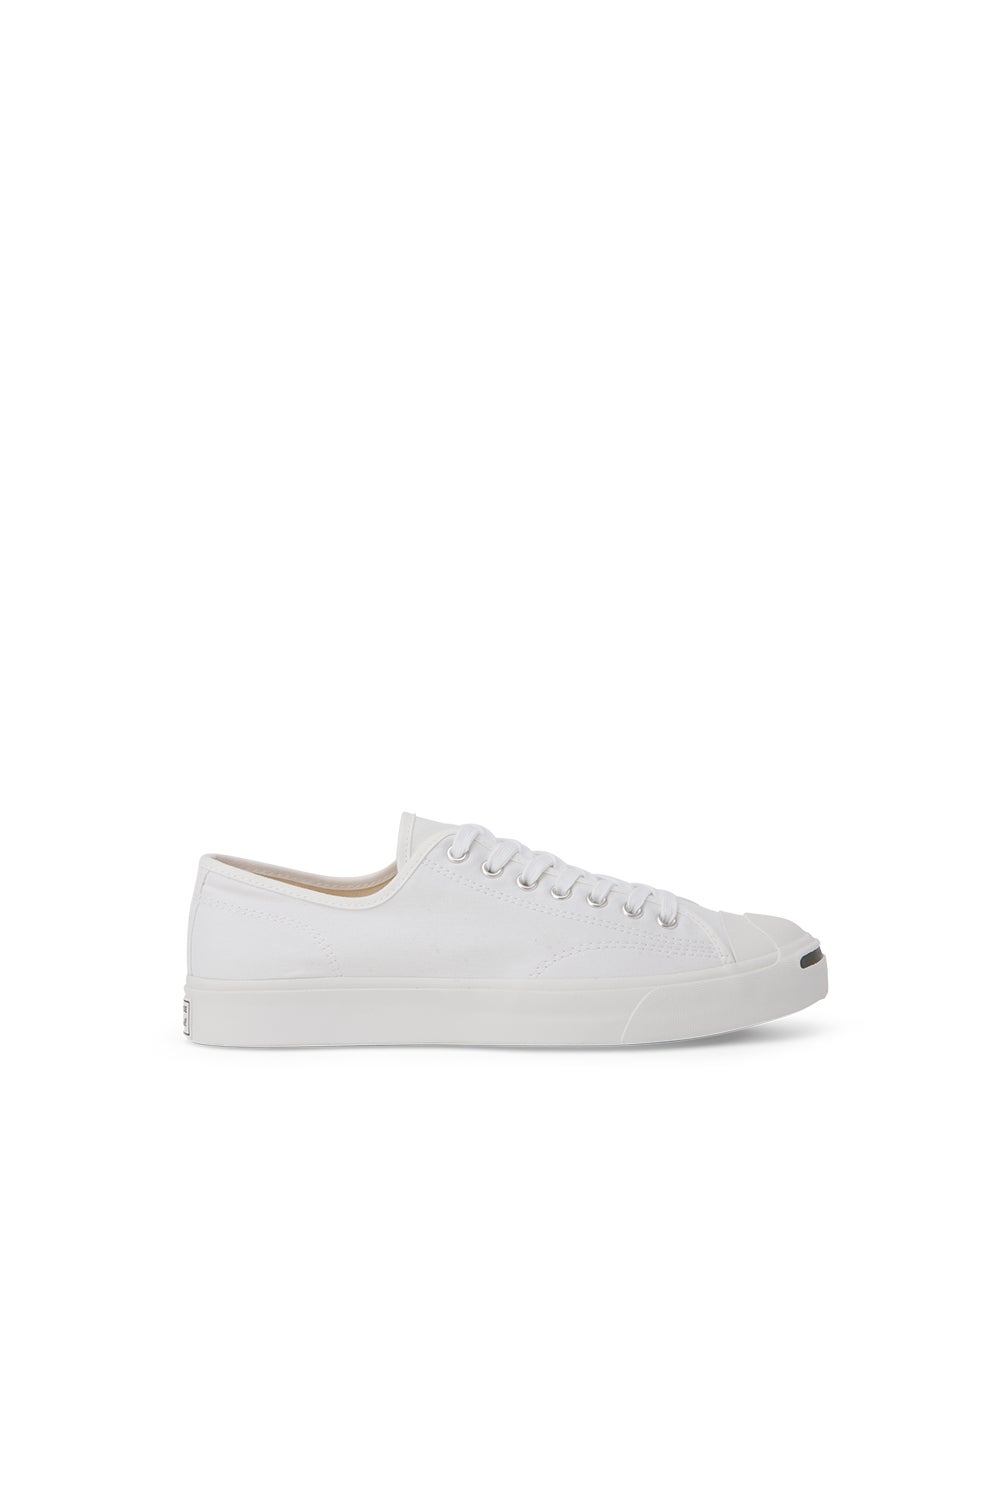 Converse Jack Purcell First In Class Low Top White